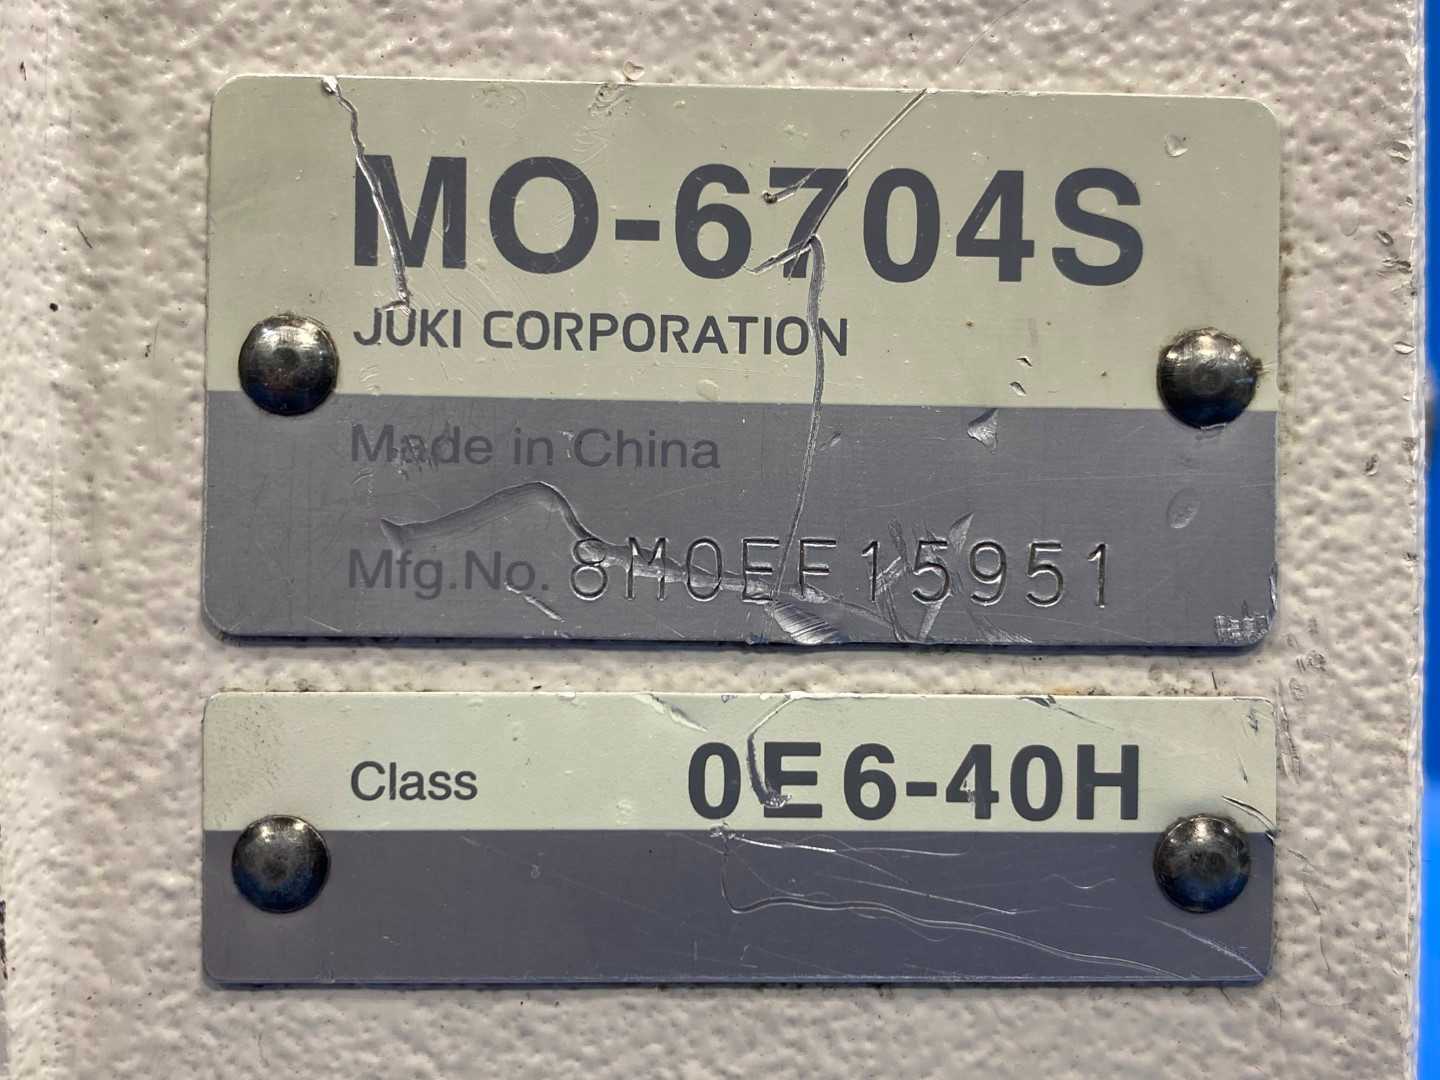 Juki MO-6704S Sewing Machine (For Parts)